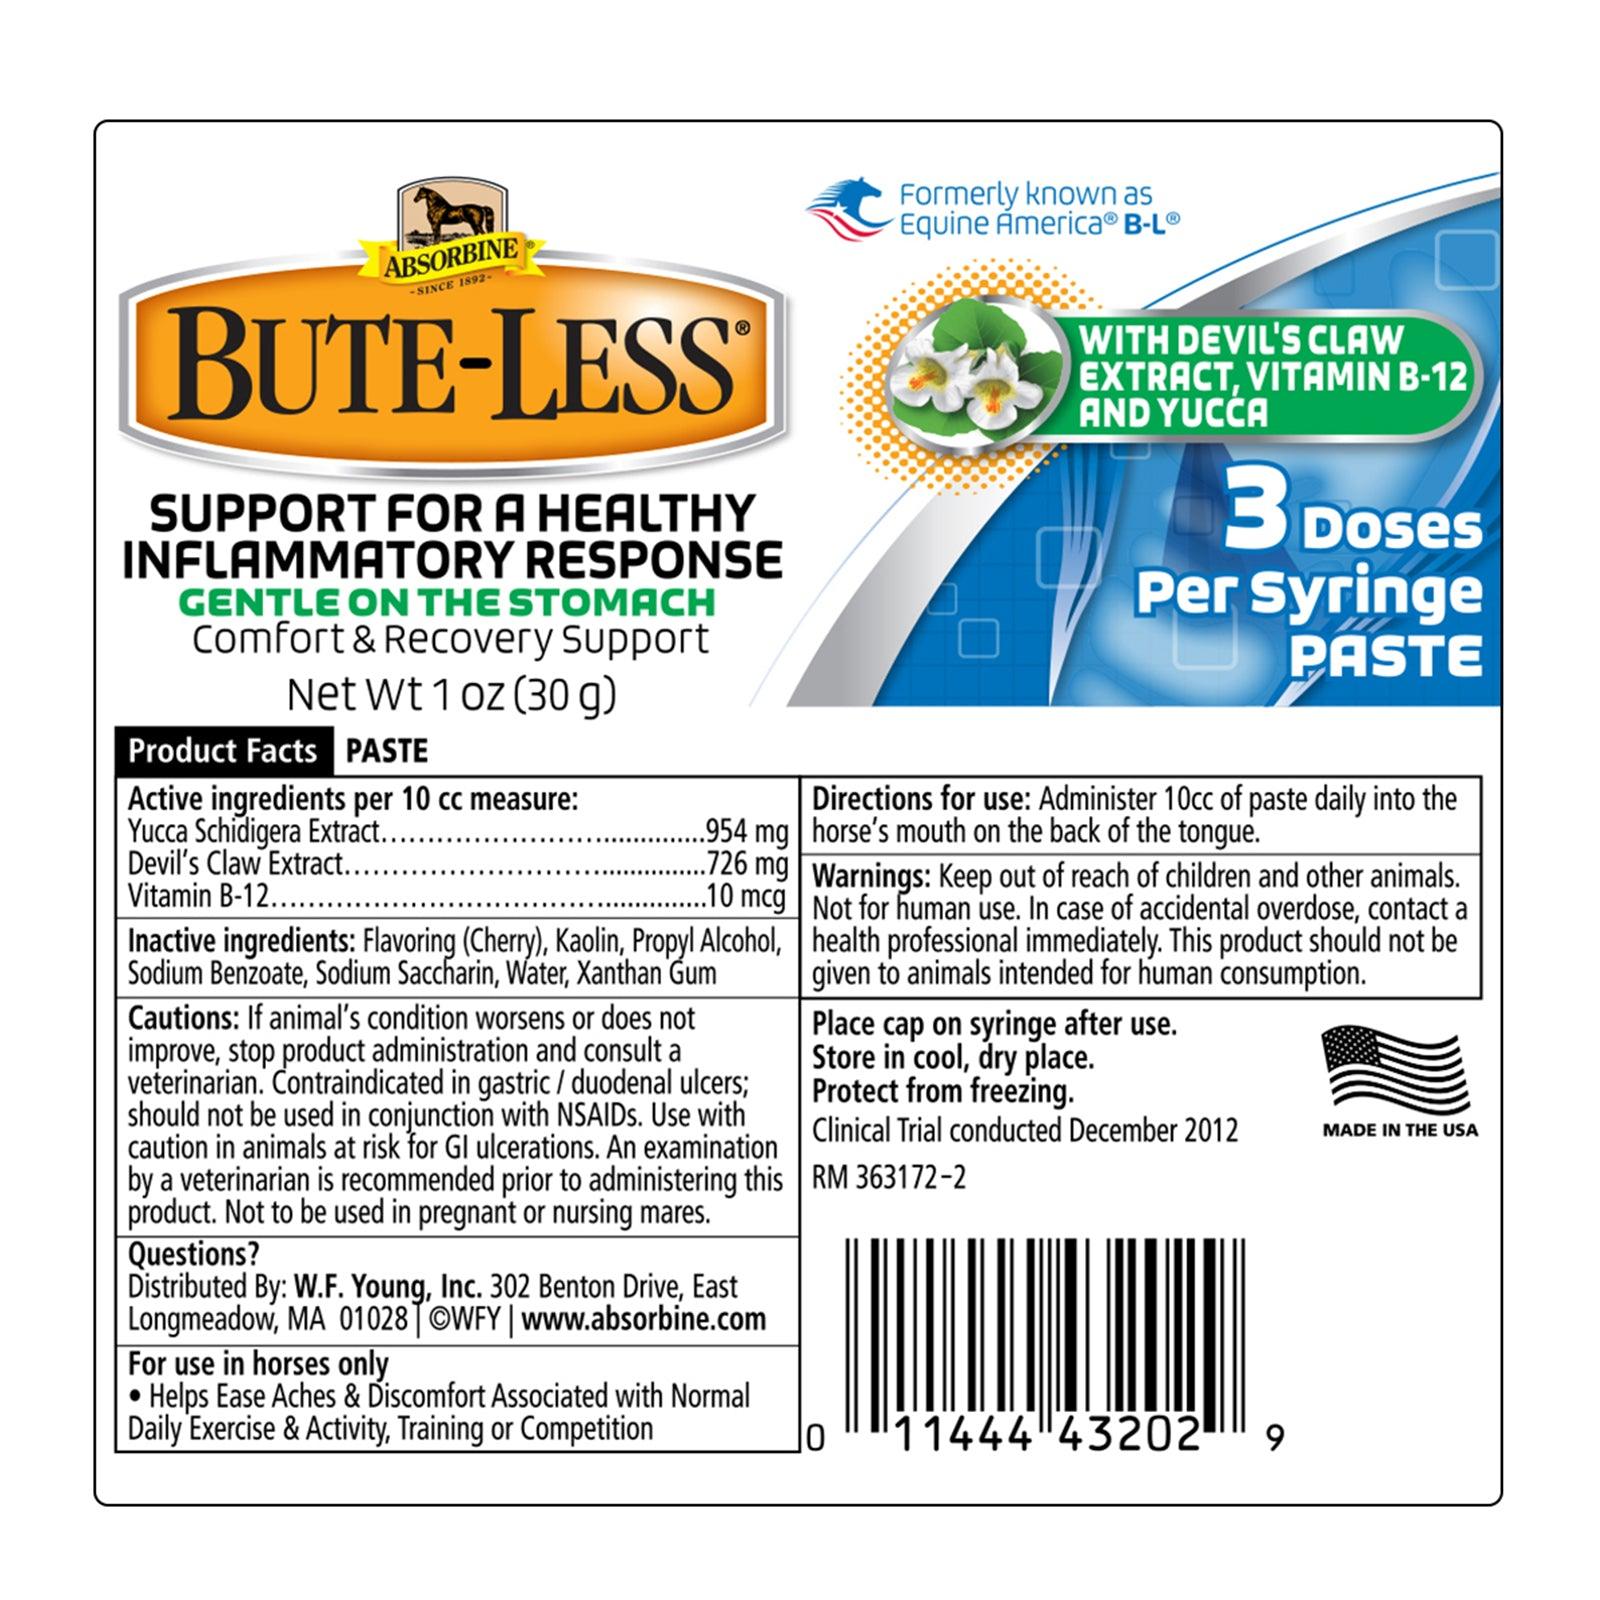 Bute-less paste support for a healthy inflammatory response. Gentle on the stomach, comfort & recovery support net weight 1 oz. label.